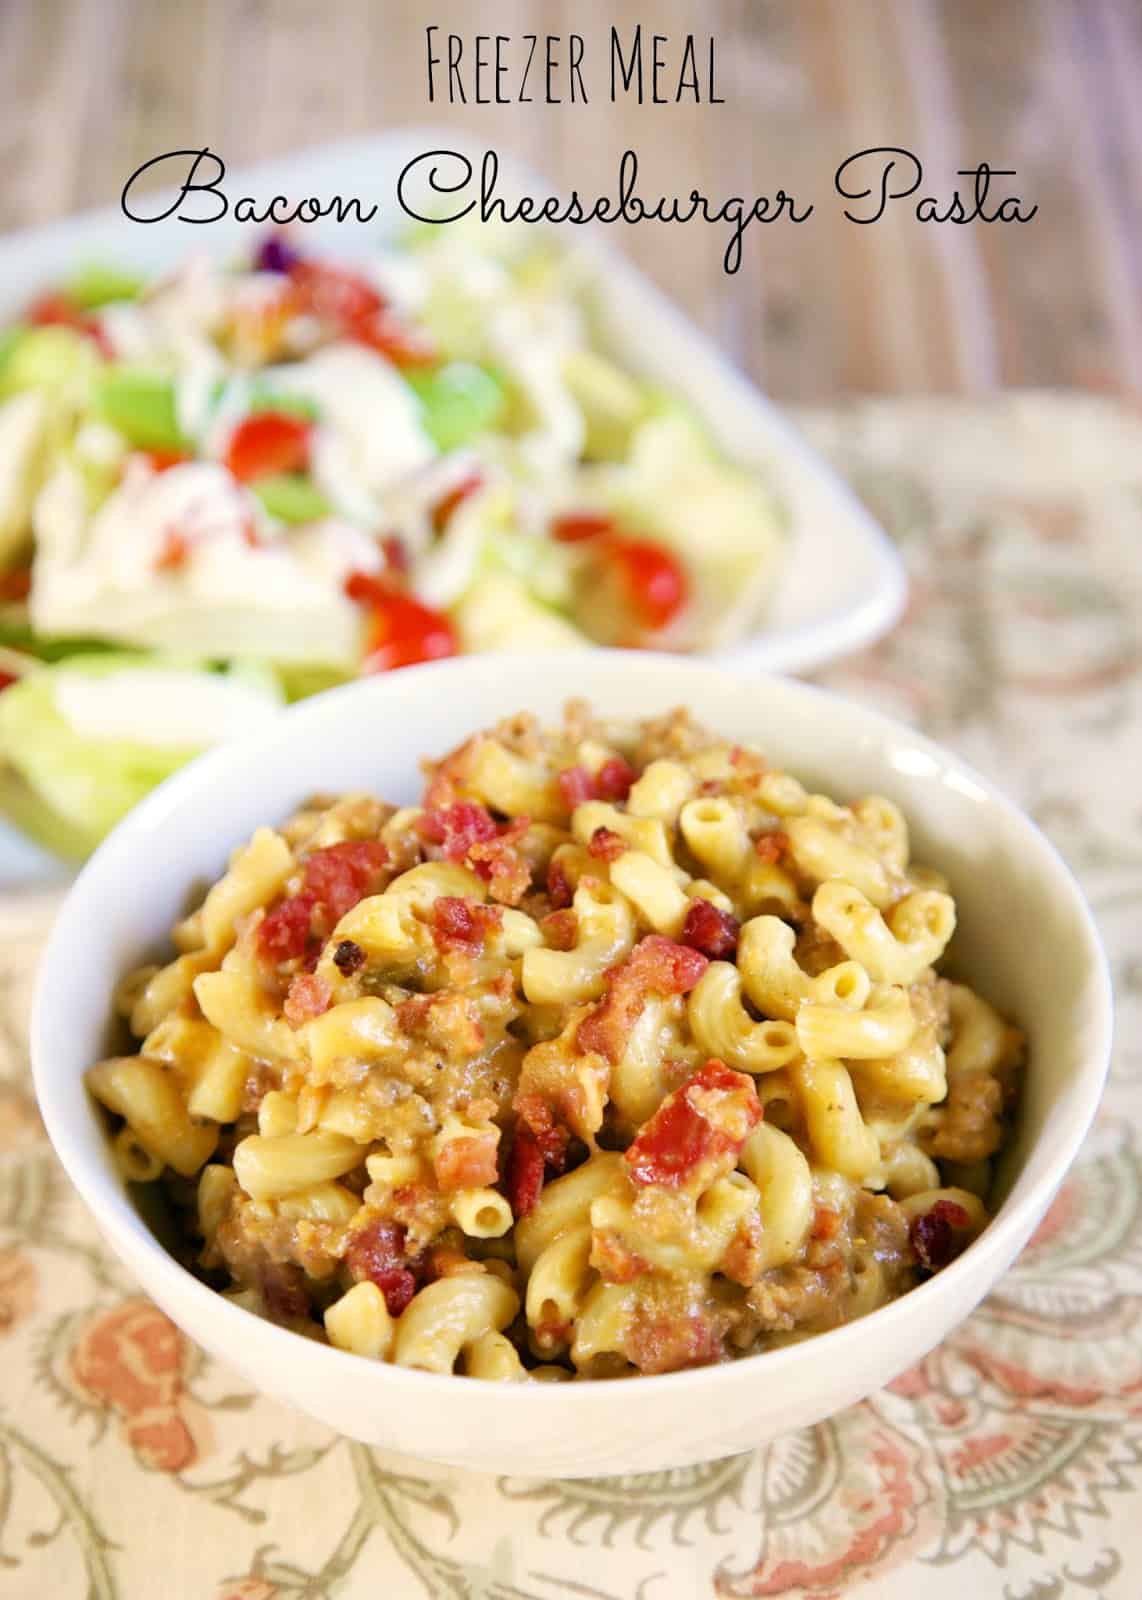 Slow Cooker Bacon Cheeseburger Pasta - FREEZER MEAL - just toss everything in a freezer bag for a quick meal later. Ground beef, bacon, onion, dry mustard, cream of chicken soup, Rotel tomatoes, beef broth, cheddar cheese and elbow macaroni. Kids go crazy over this easy slow cooker meal! No need to pre cook the ground beef or pre cook the pasta. It all cooks in the slow cooker. #slowcooker #freezermeal #groundbeef